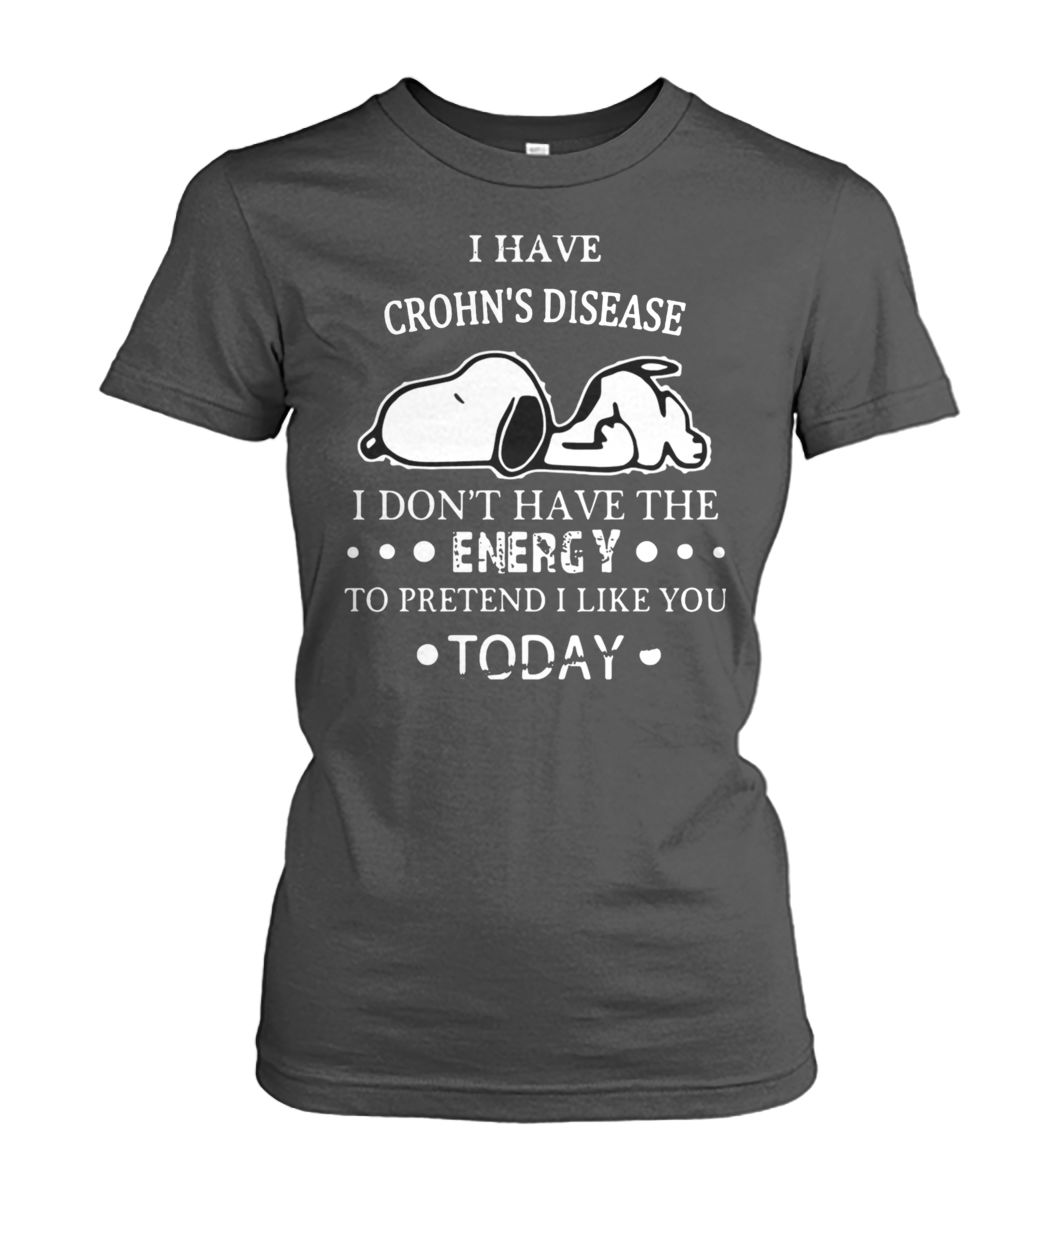 Snoopy I have crohn's disease I don't have the energy to pretend I like you women's crew tee